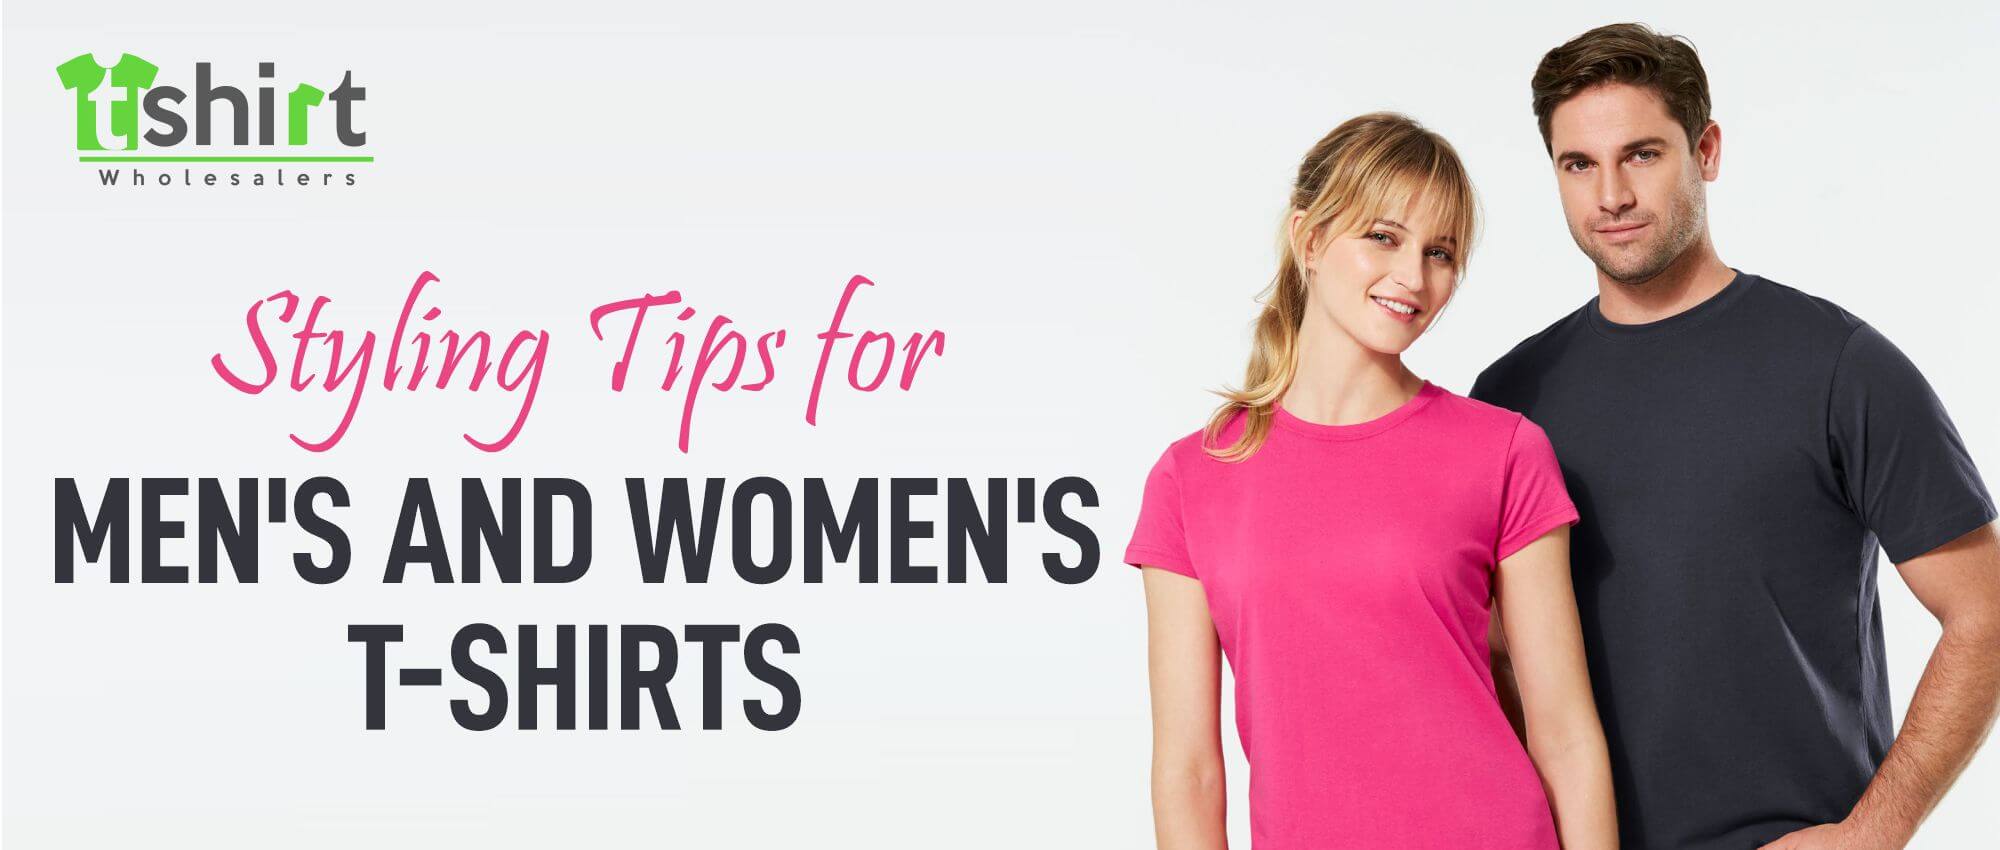 STYLING TIPS FOR MEN'S AND WOMEN'S T-SHIRTS